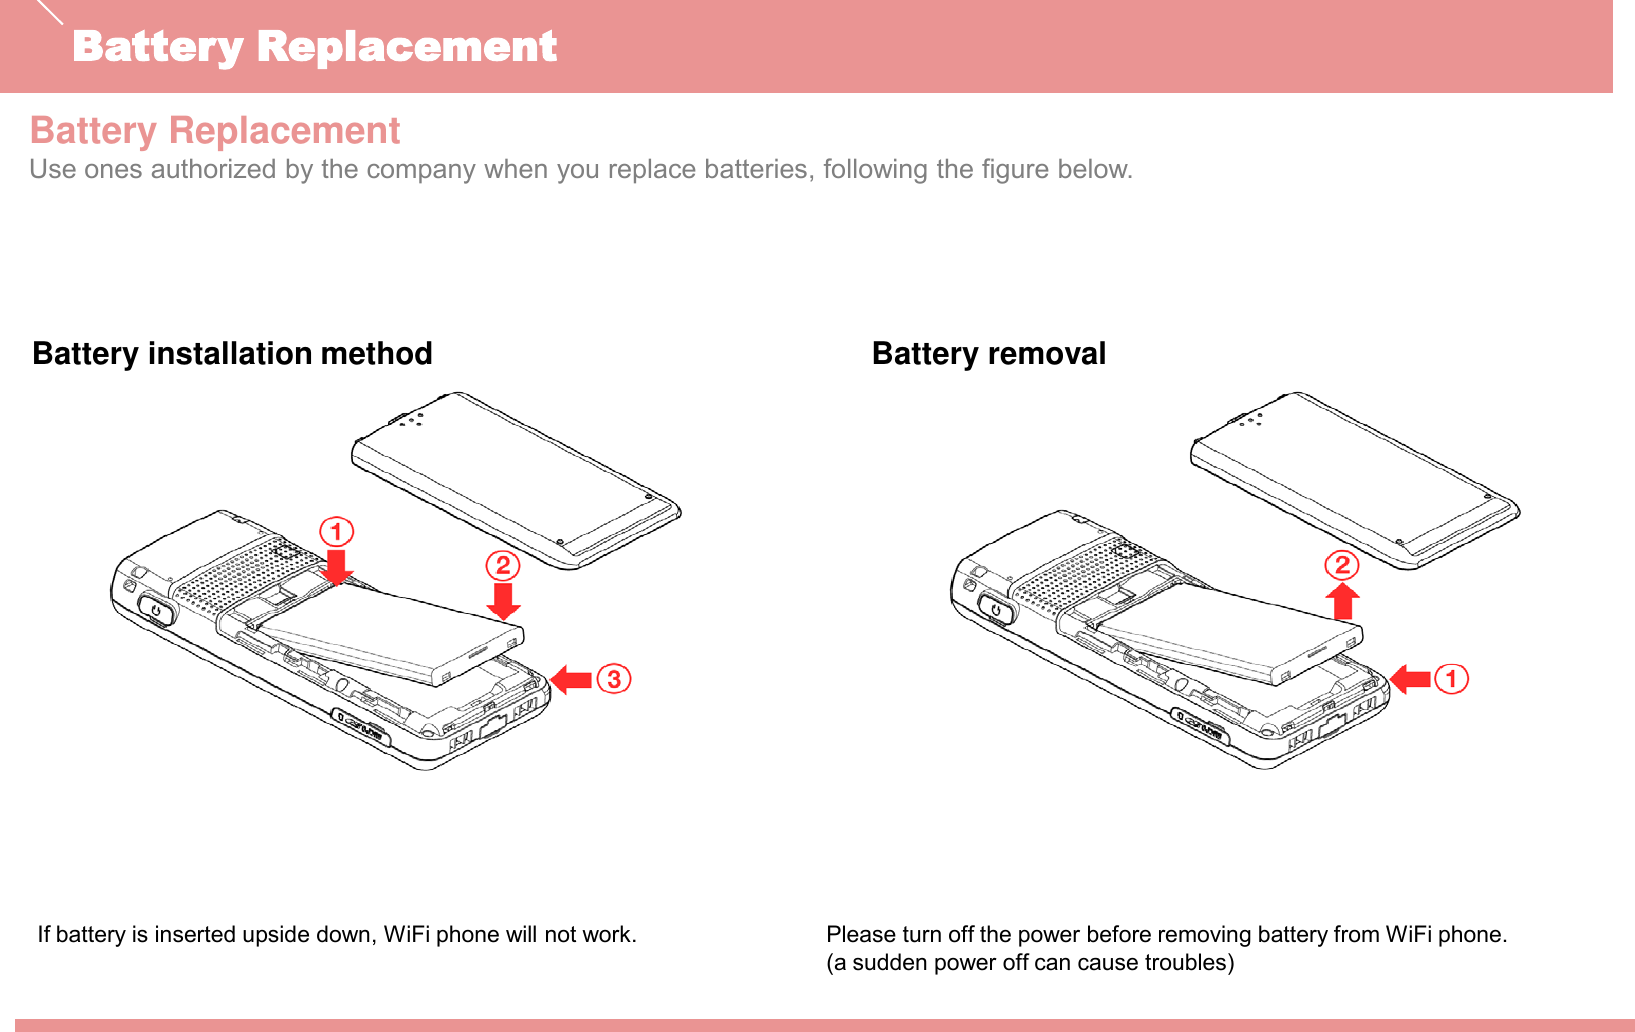 Battery ReplacementUse ones authorized by the company when you replace batteries, following the figure below.Battery installation method Battery removalIf battery is inserted upside down, WiFi phone will not work. Please turn off the power before removing battery from WiFi phone.(a sudden power off can cause troubles)Battery Replacement